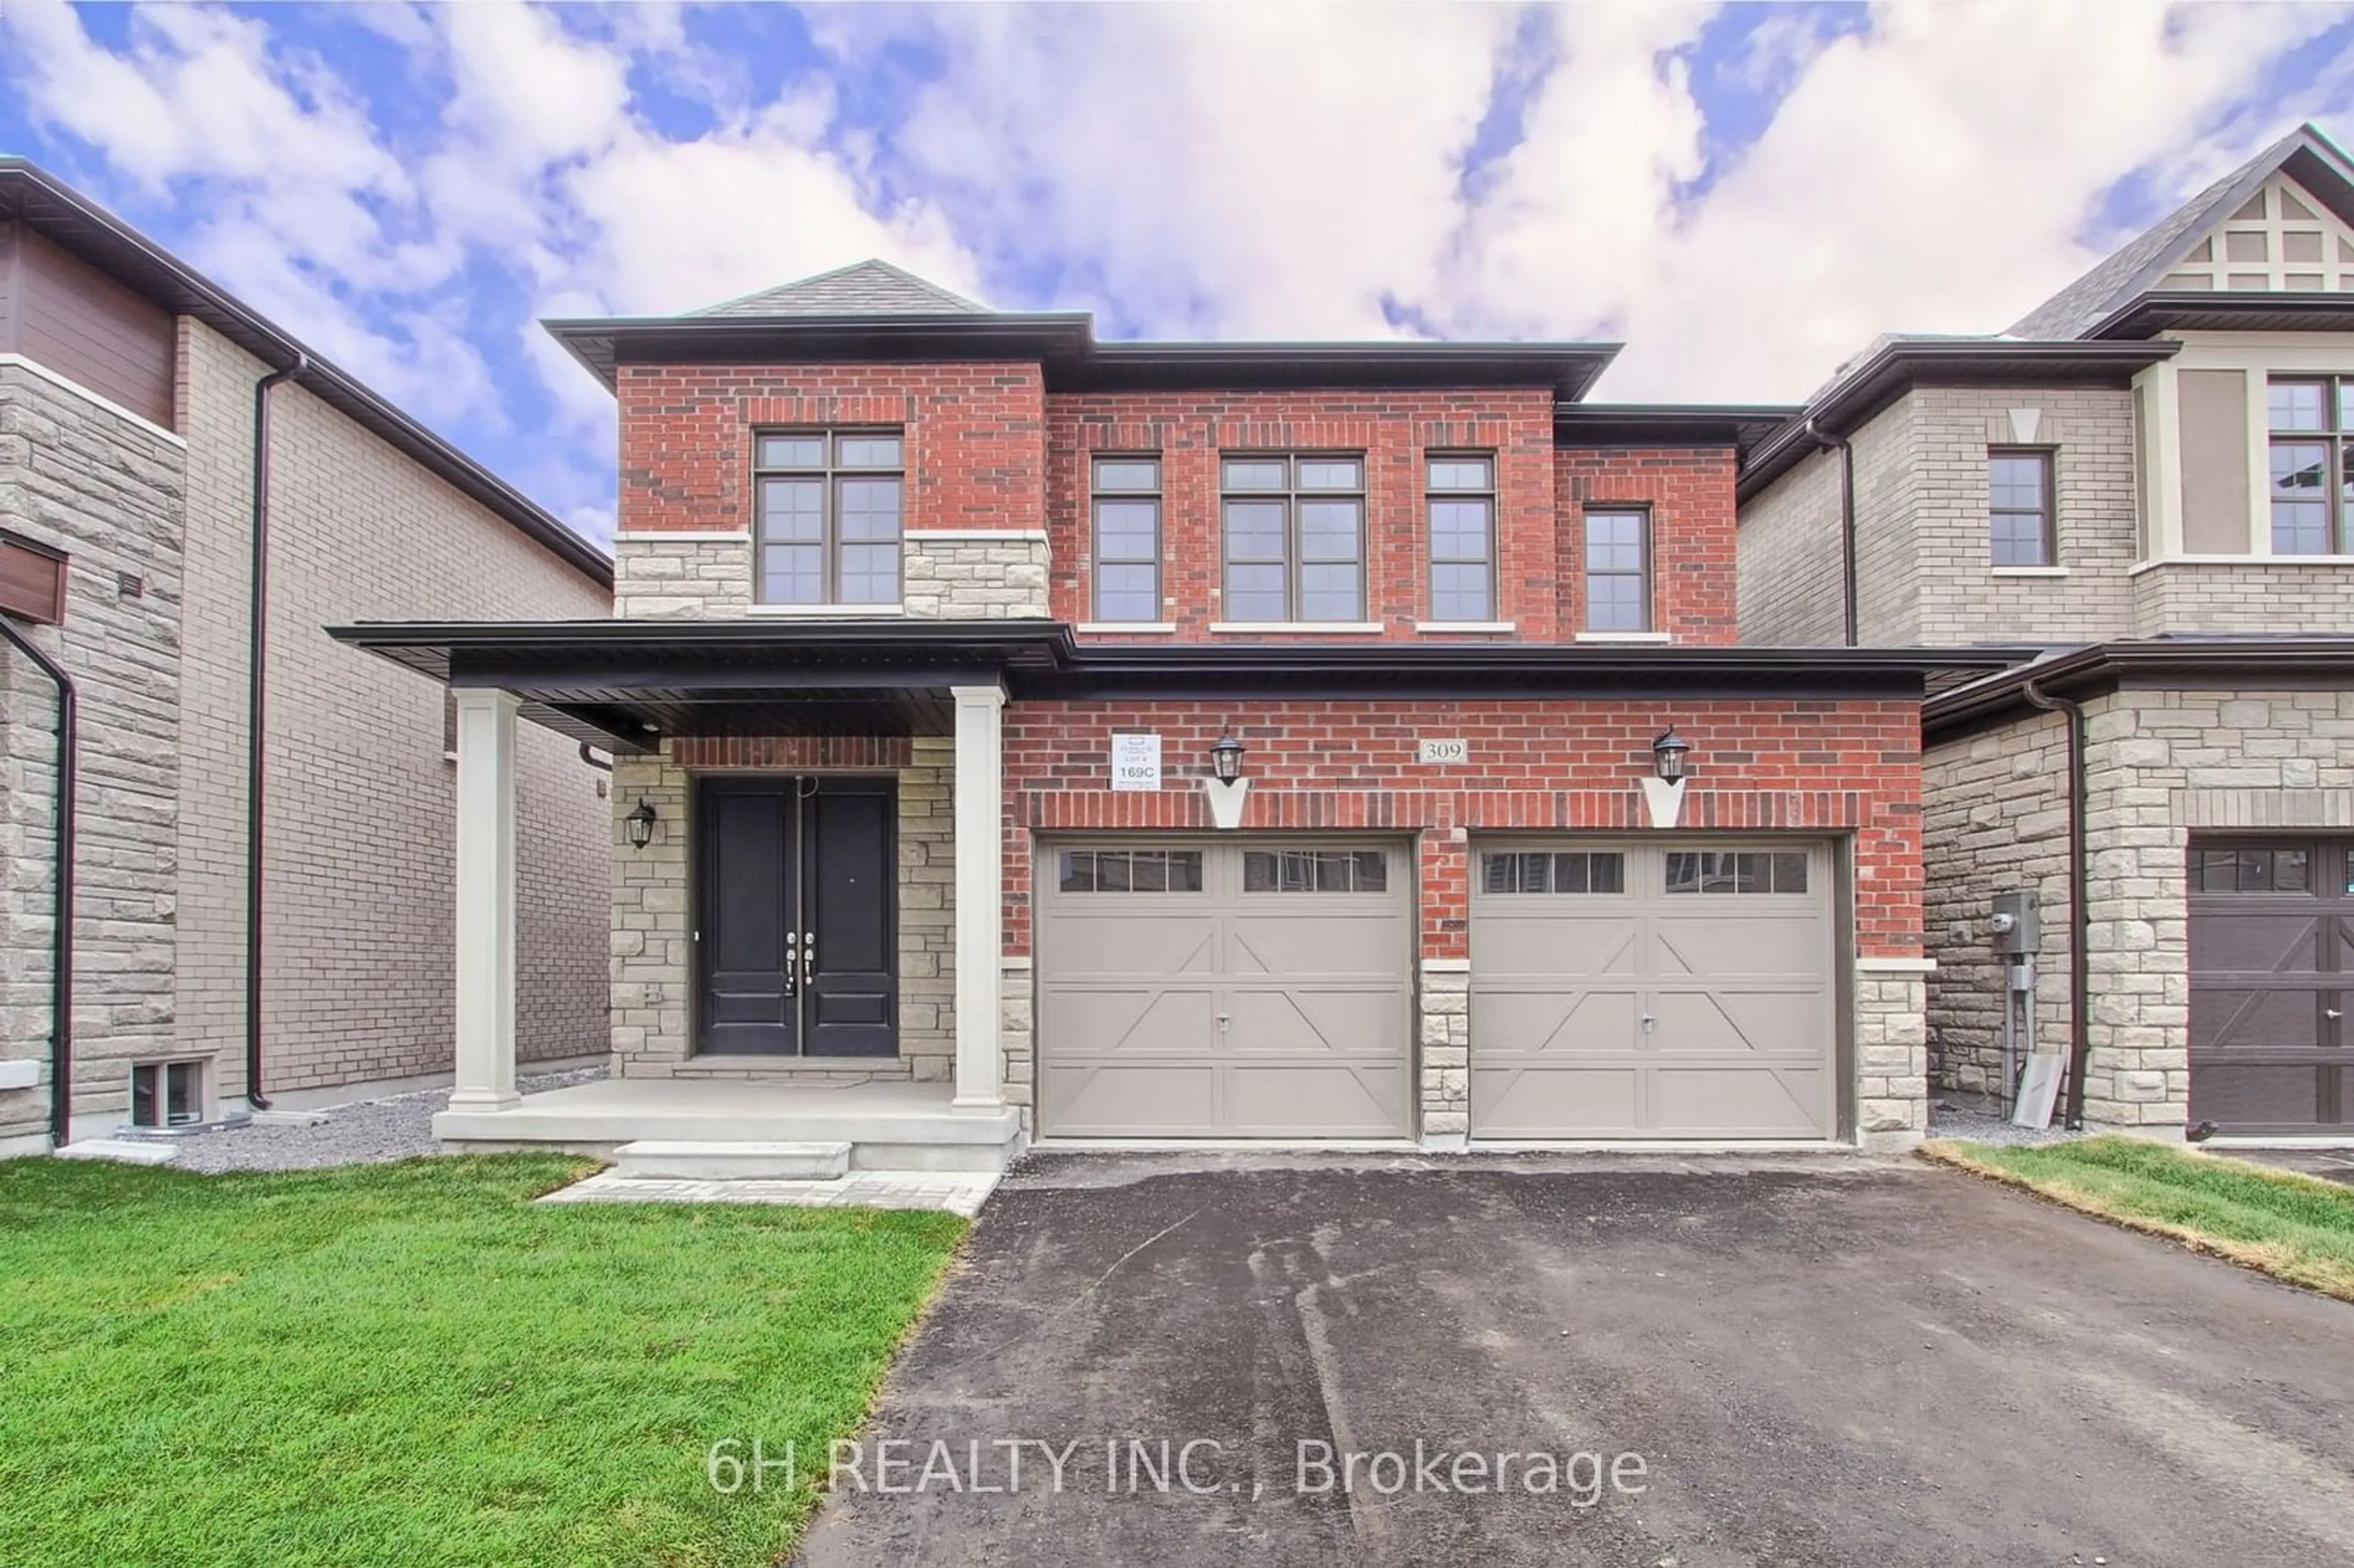 Home with brick exterior material for 309 Boundary Blvd, Whitchurch-Stouffville Ontario L4A 5E2